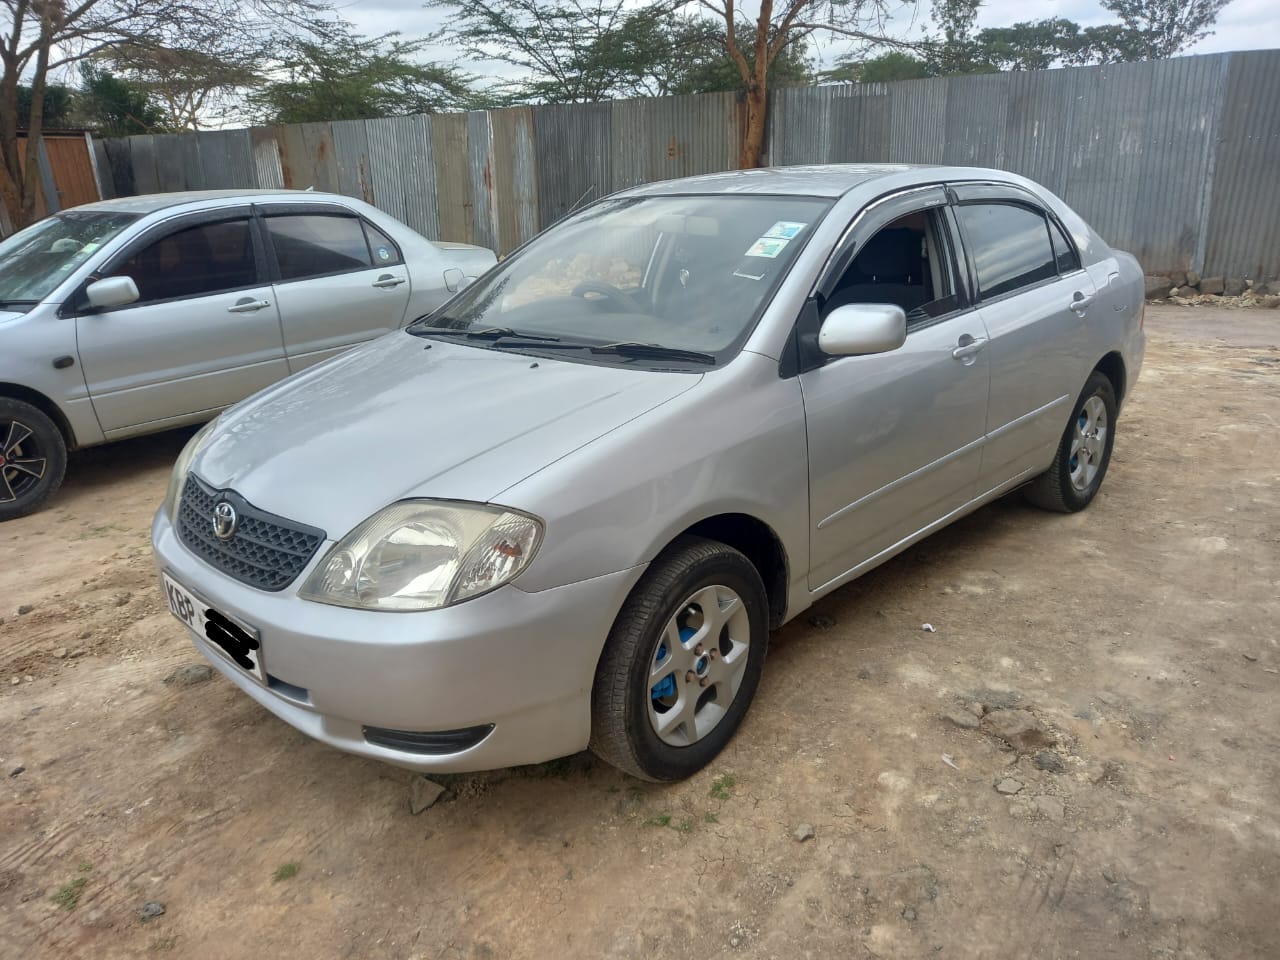 Toyota Corolla NZE for sale in Kenya ðŸ”¥ QUICK SALE You Pay 30% Deposit Trade in OK EXCLUSIVE